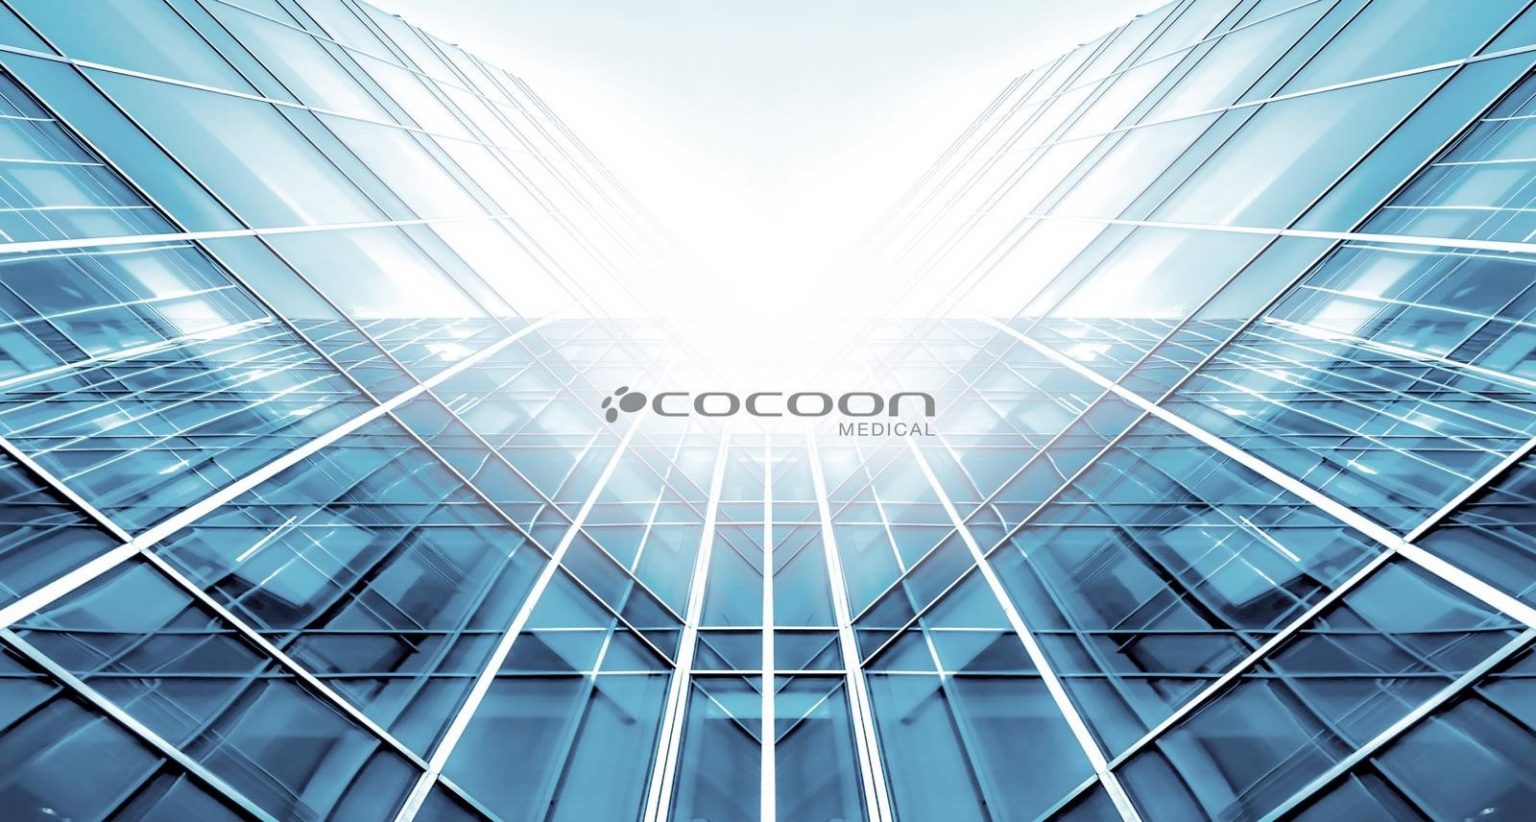 Cocoon 2 01